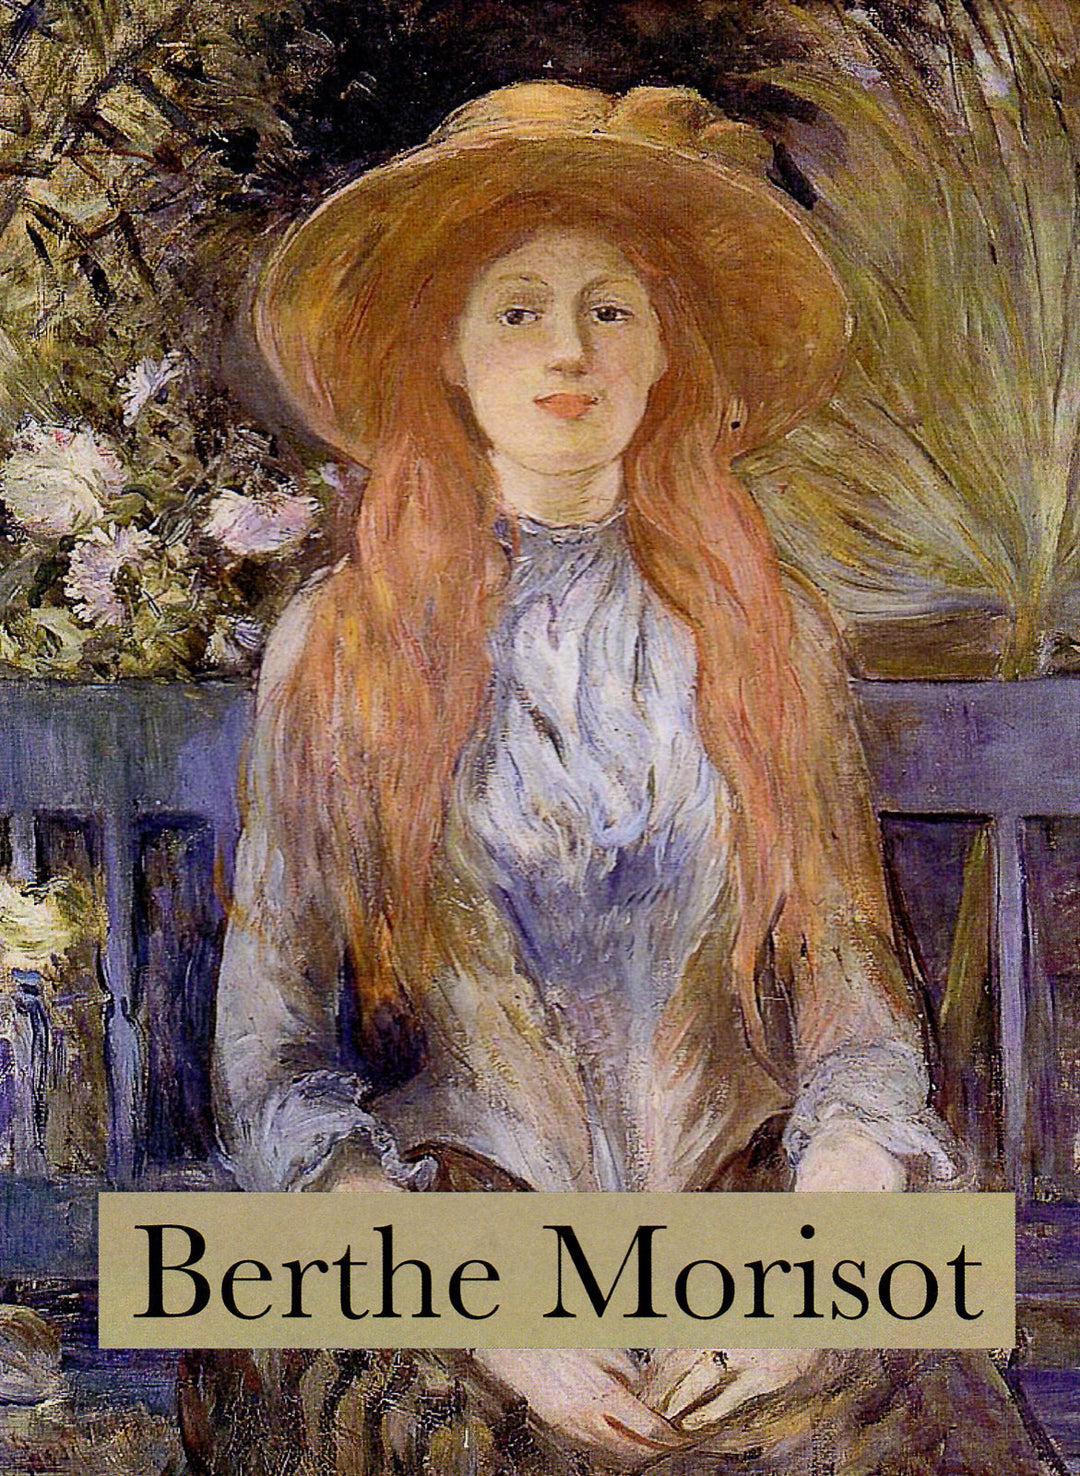 Berthe Morisot  Note Cards - Boxed Set of 16 Note Cards with Envelopes